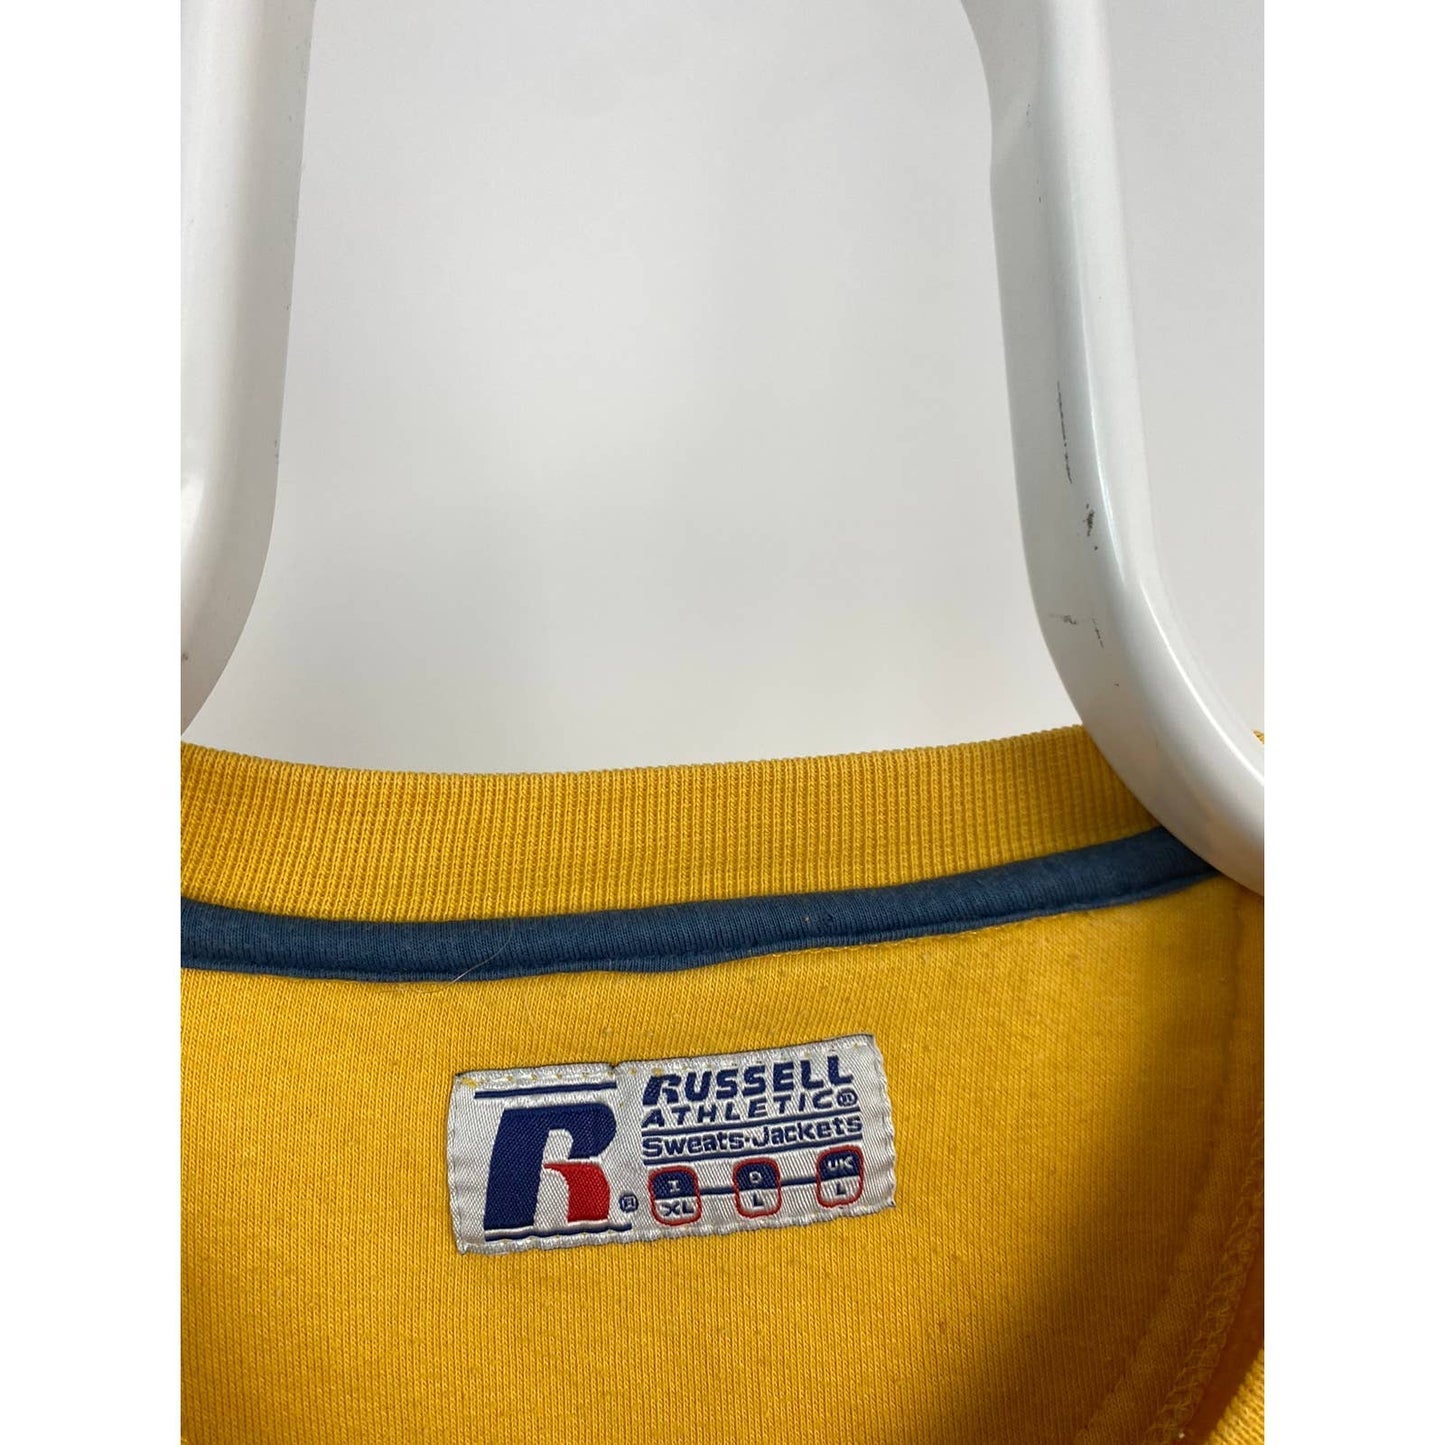 Russell Athletic vintage yellow sweatshirt big logo spellout